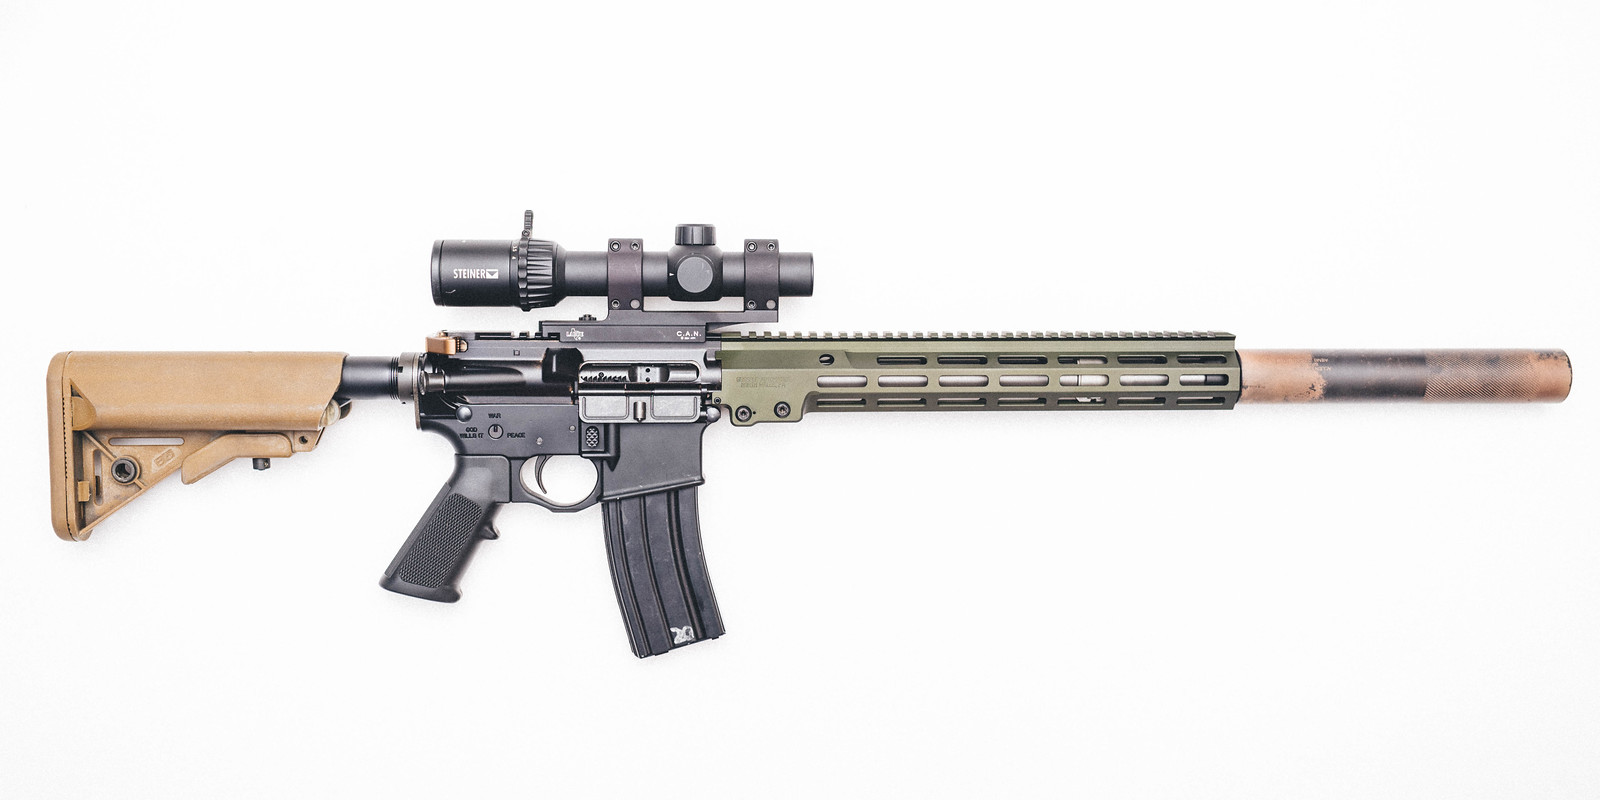 Official Geissele MK16 Picture Thread - Page 4 - AR15.COM